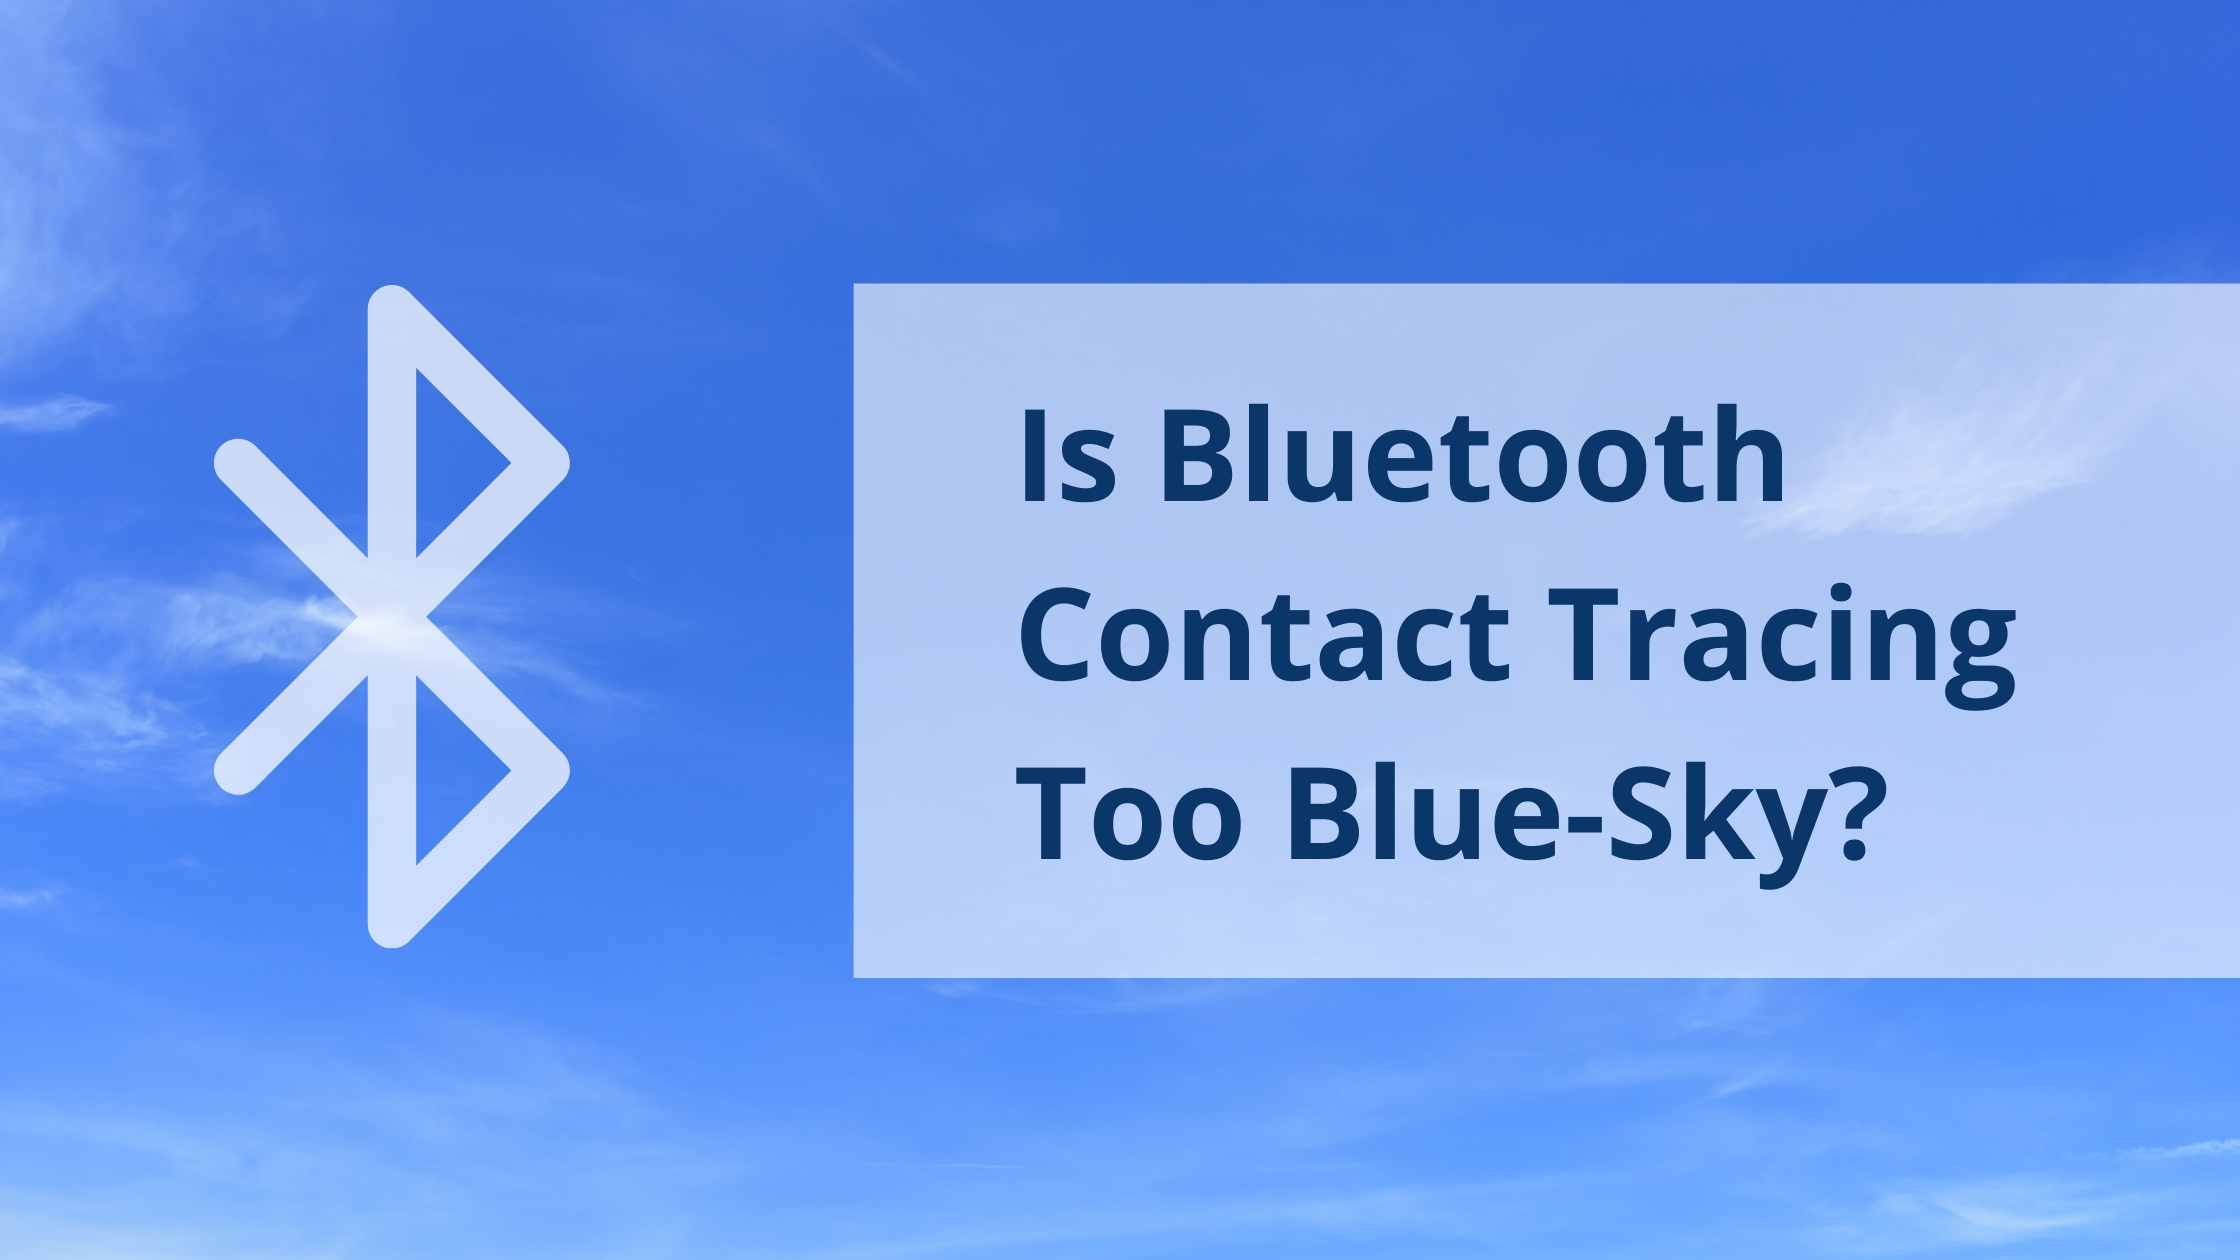 Blue-Sky Concept; Background image of blue sky with light clouds, overlaid with Bluetooth logo and text 'Is Bluetooth Contact Tracing Too Blue-Sky?'